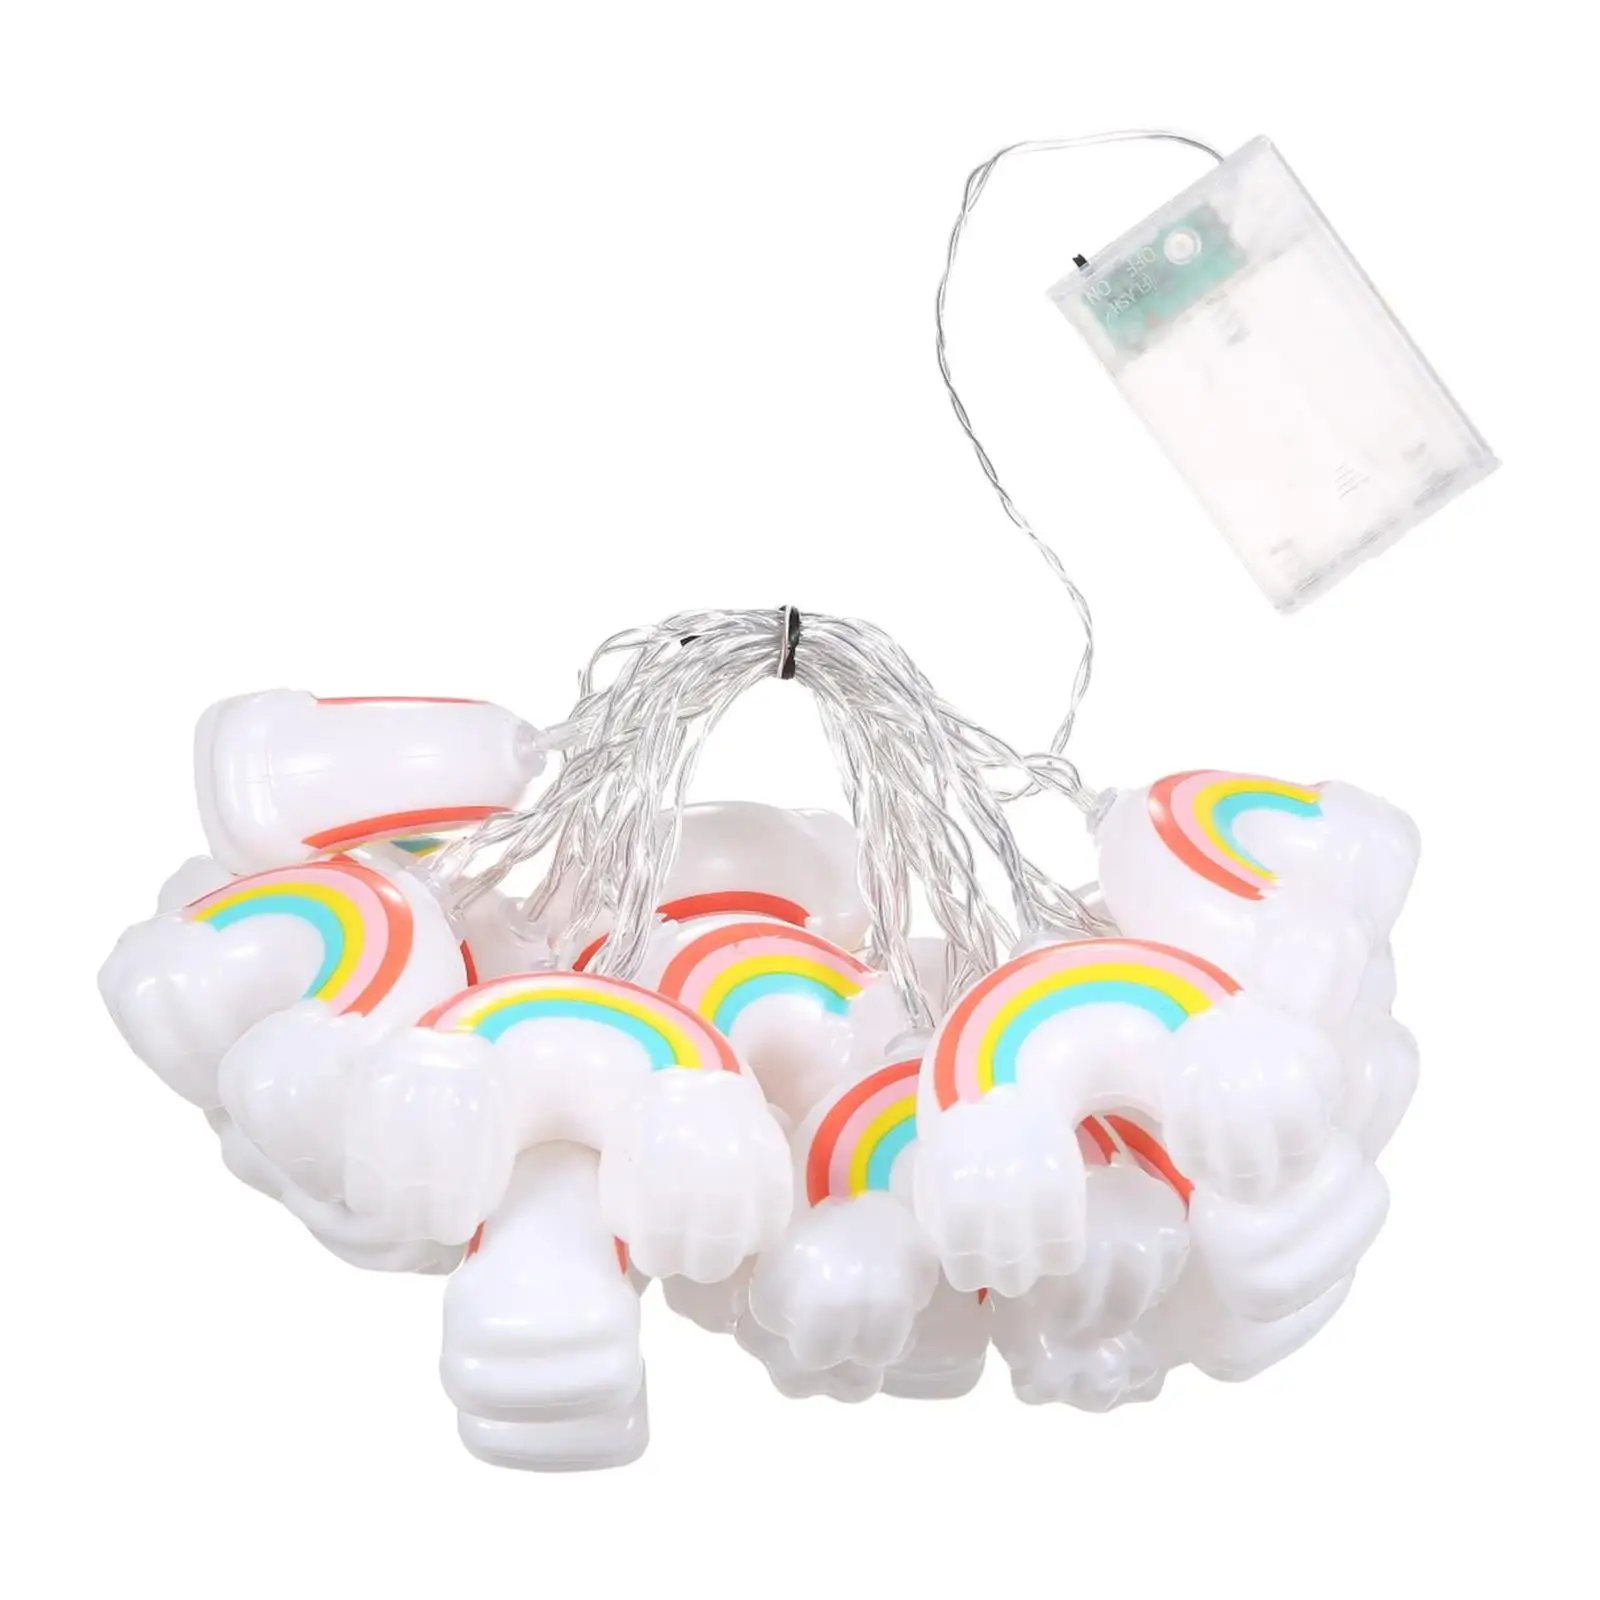 LED Rainbow String Lights Fairy Lights Contain 20 Lights Funny for Decorations